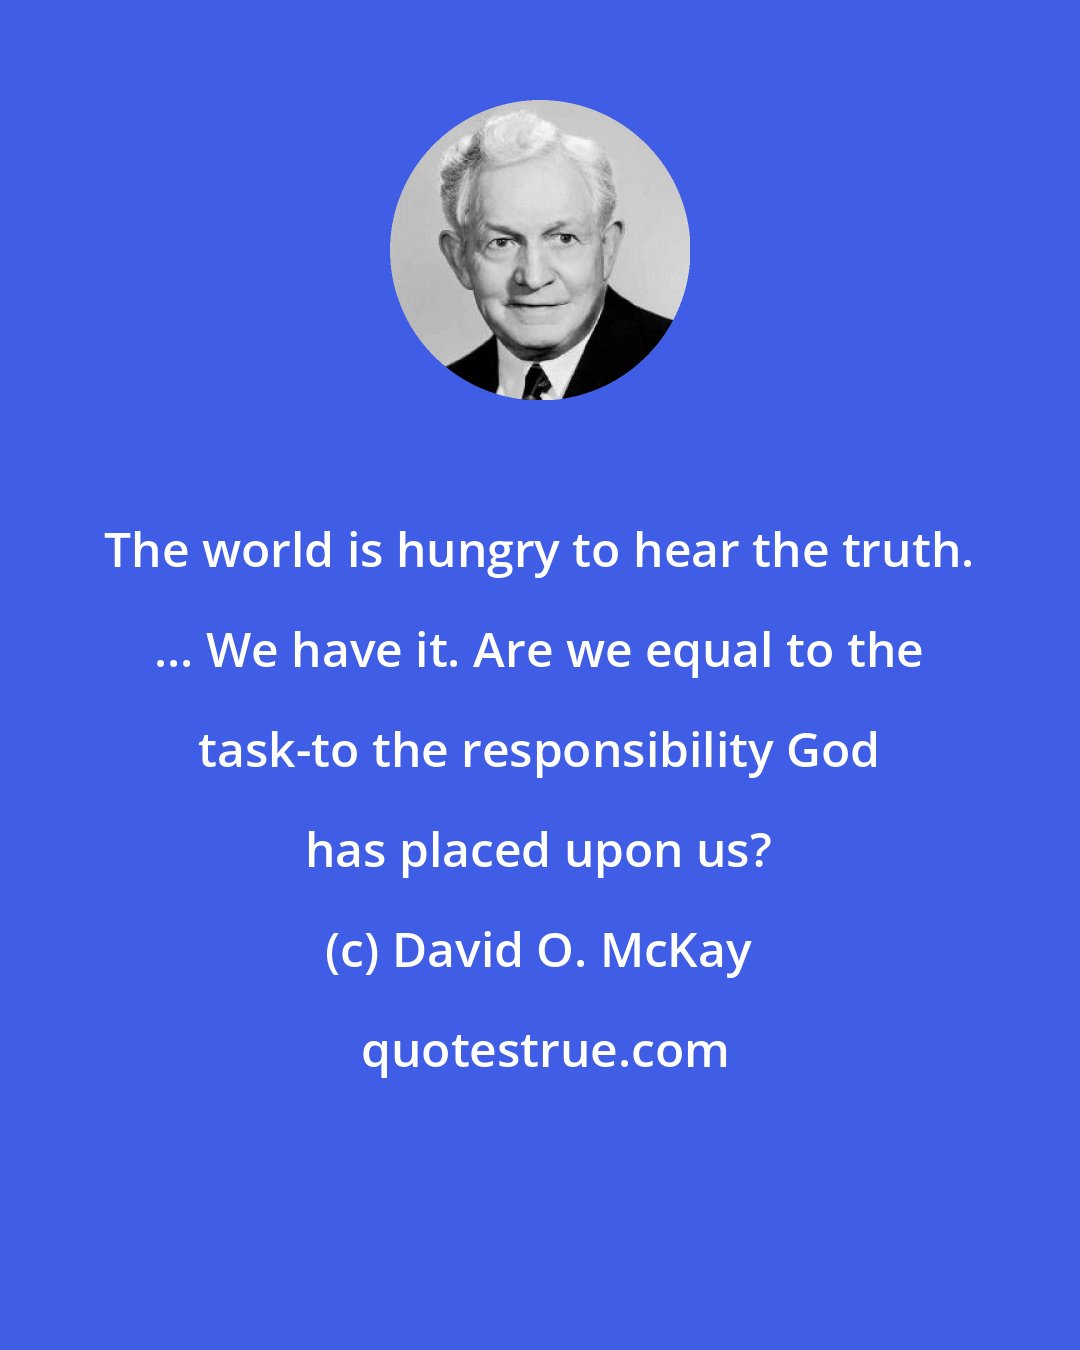 David O. McKay: The world is hungry to hear the truth. ... We have it. Are we equal to the task-to the responsibility God has placed upon us?